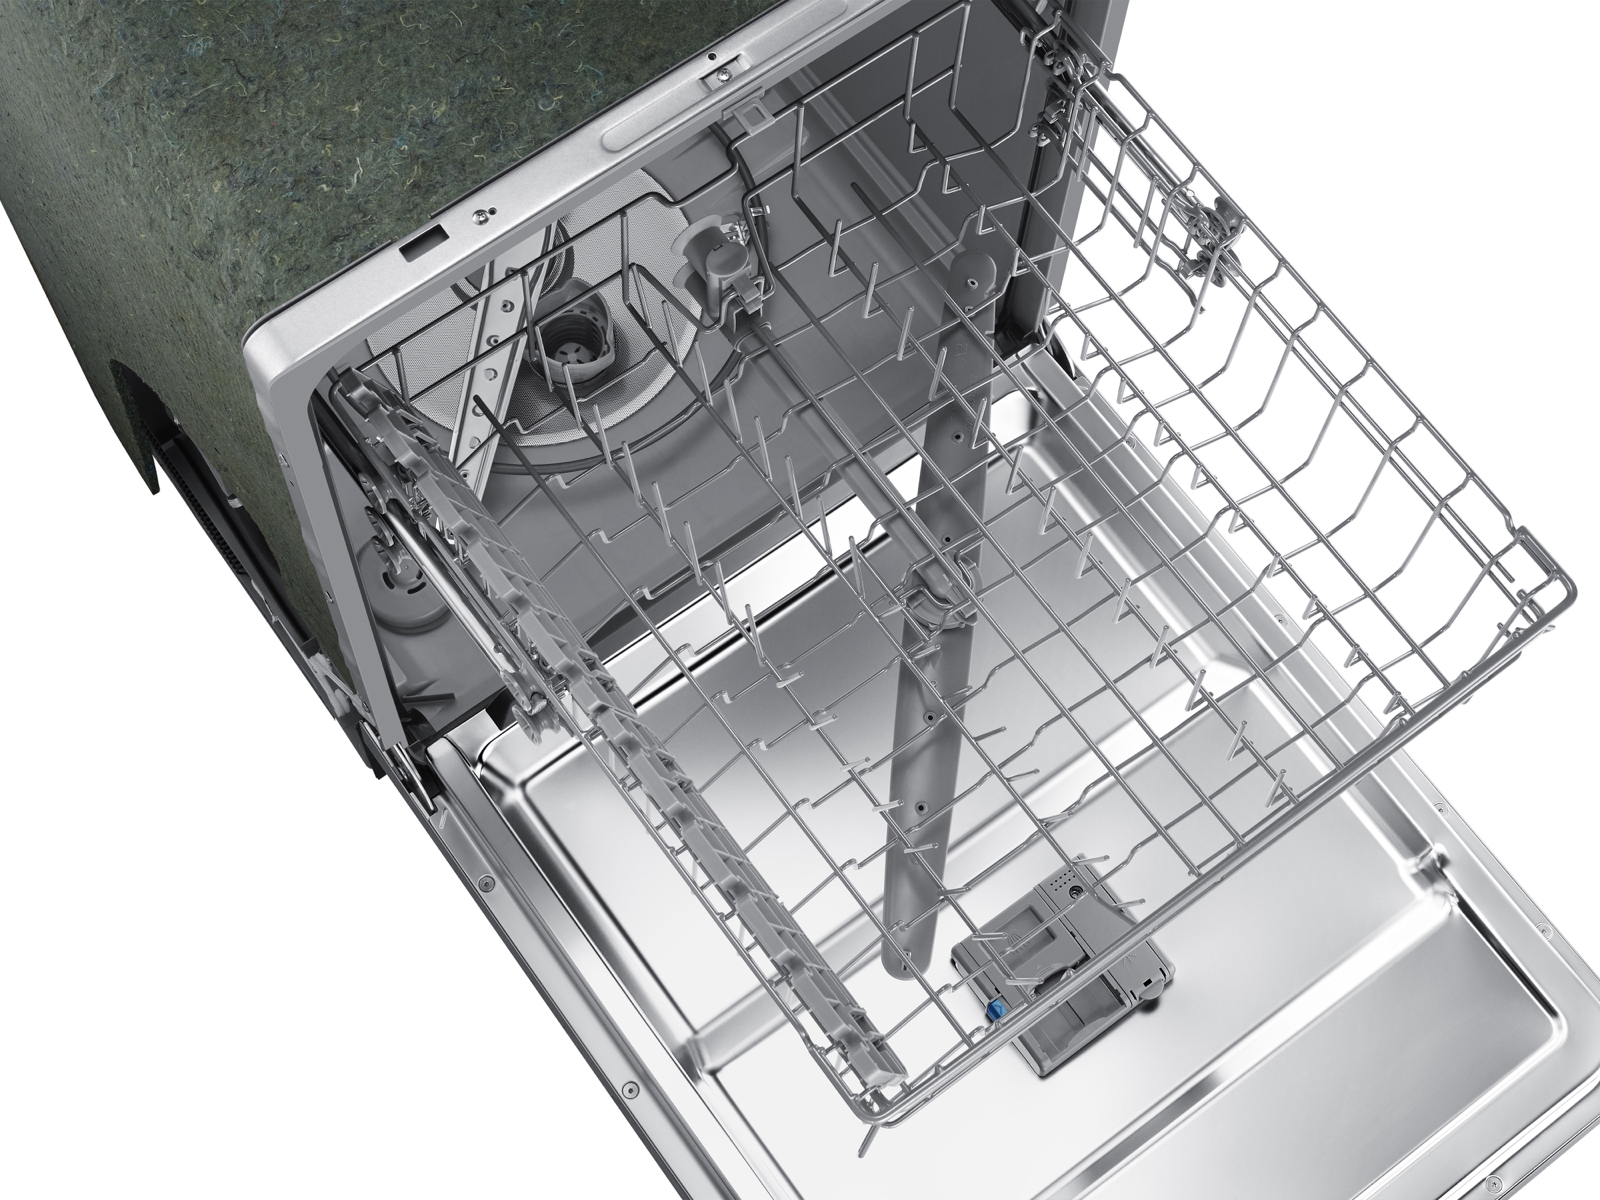 Thumbnail image of Digital Touch Control 55 dBA Dishwasher in Stainless Steel